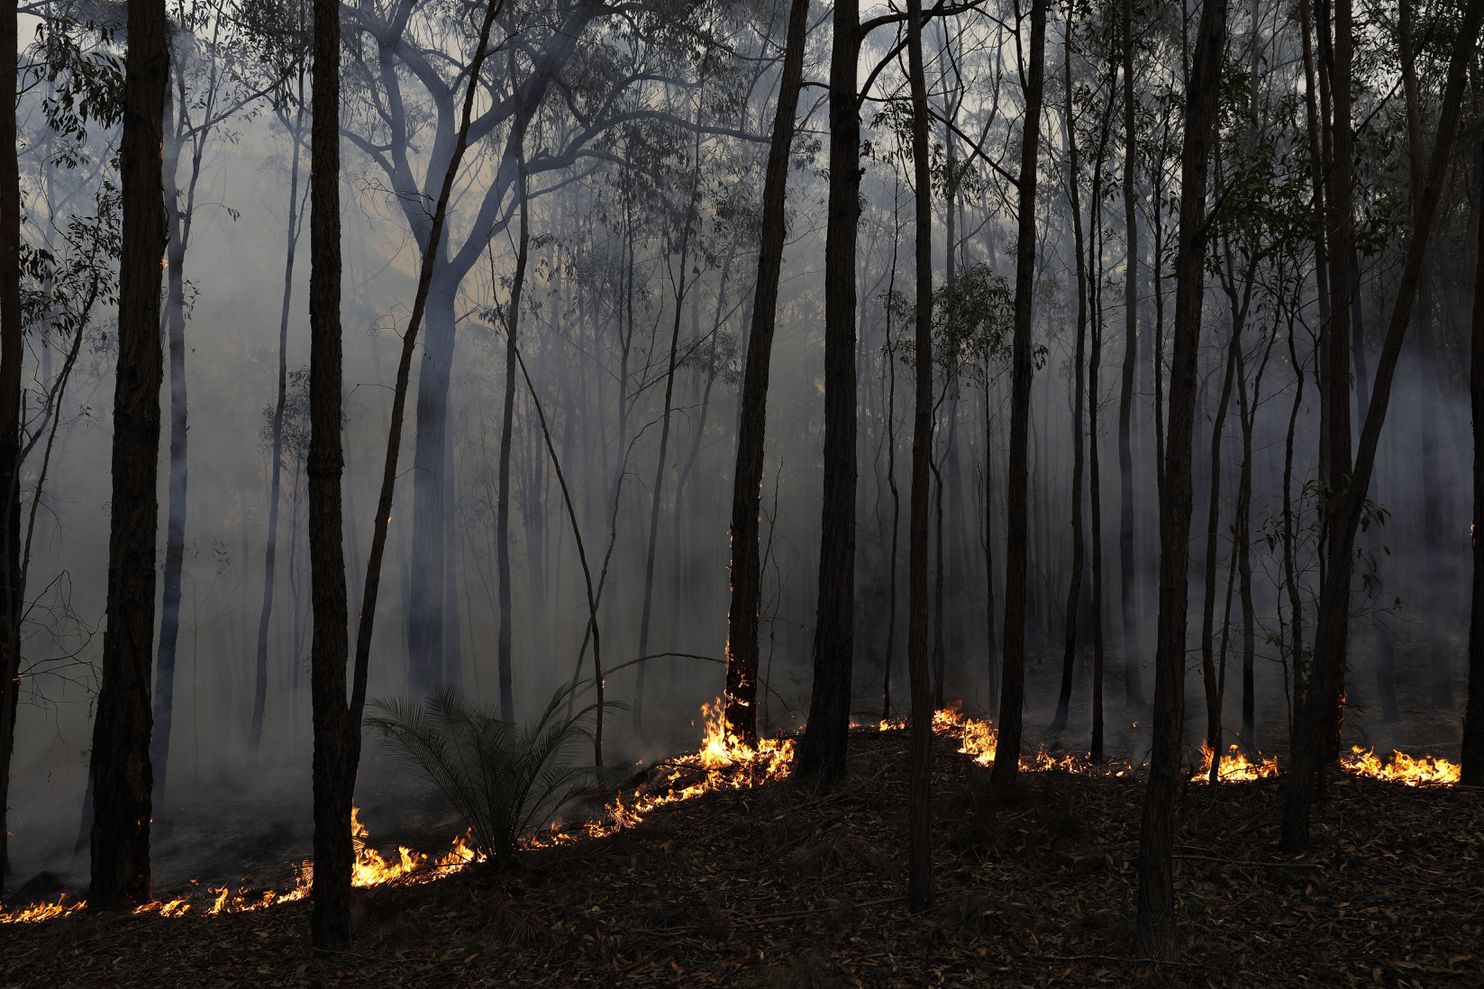 Australia bush fires have nearly doubled country’s annual greenhouse gas emissions